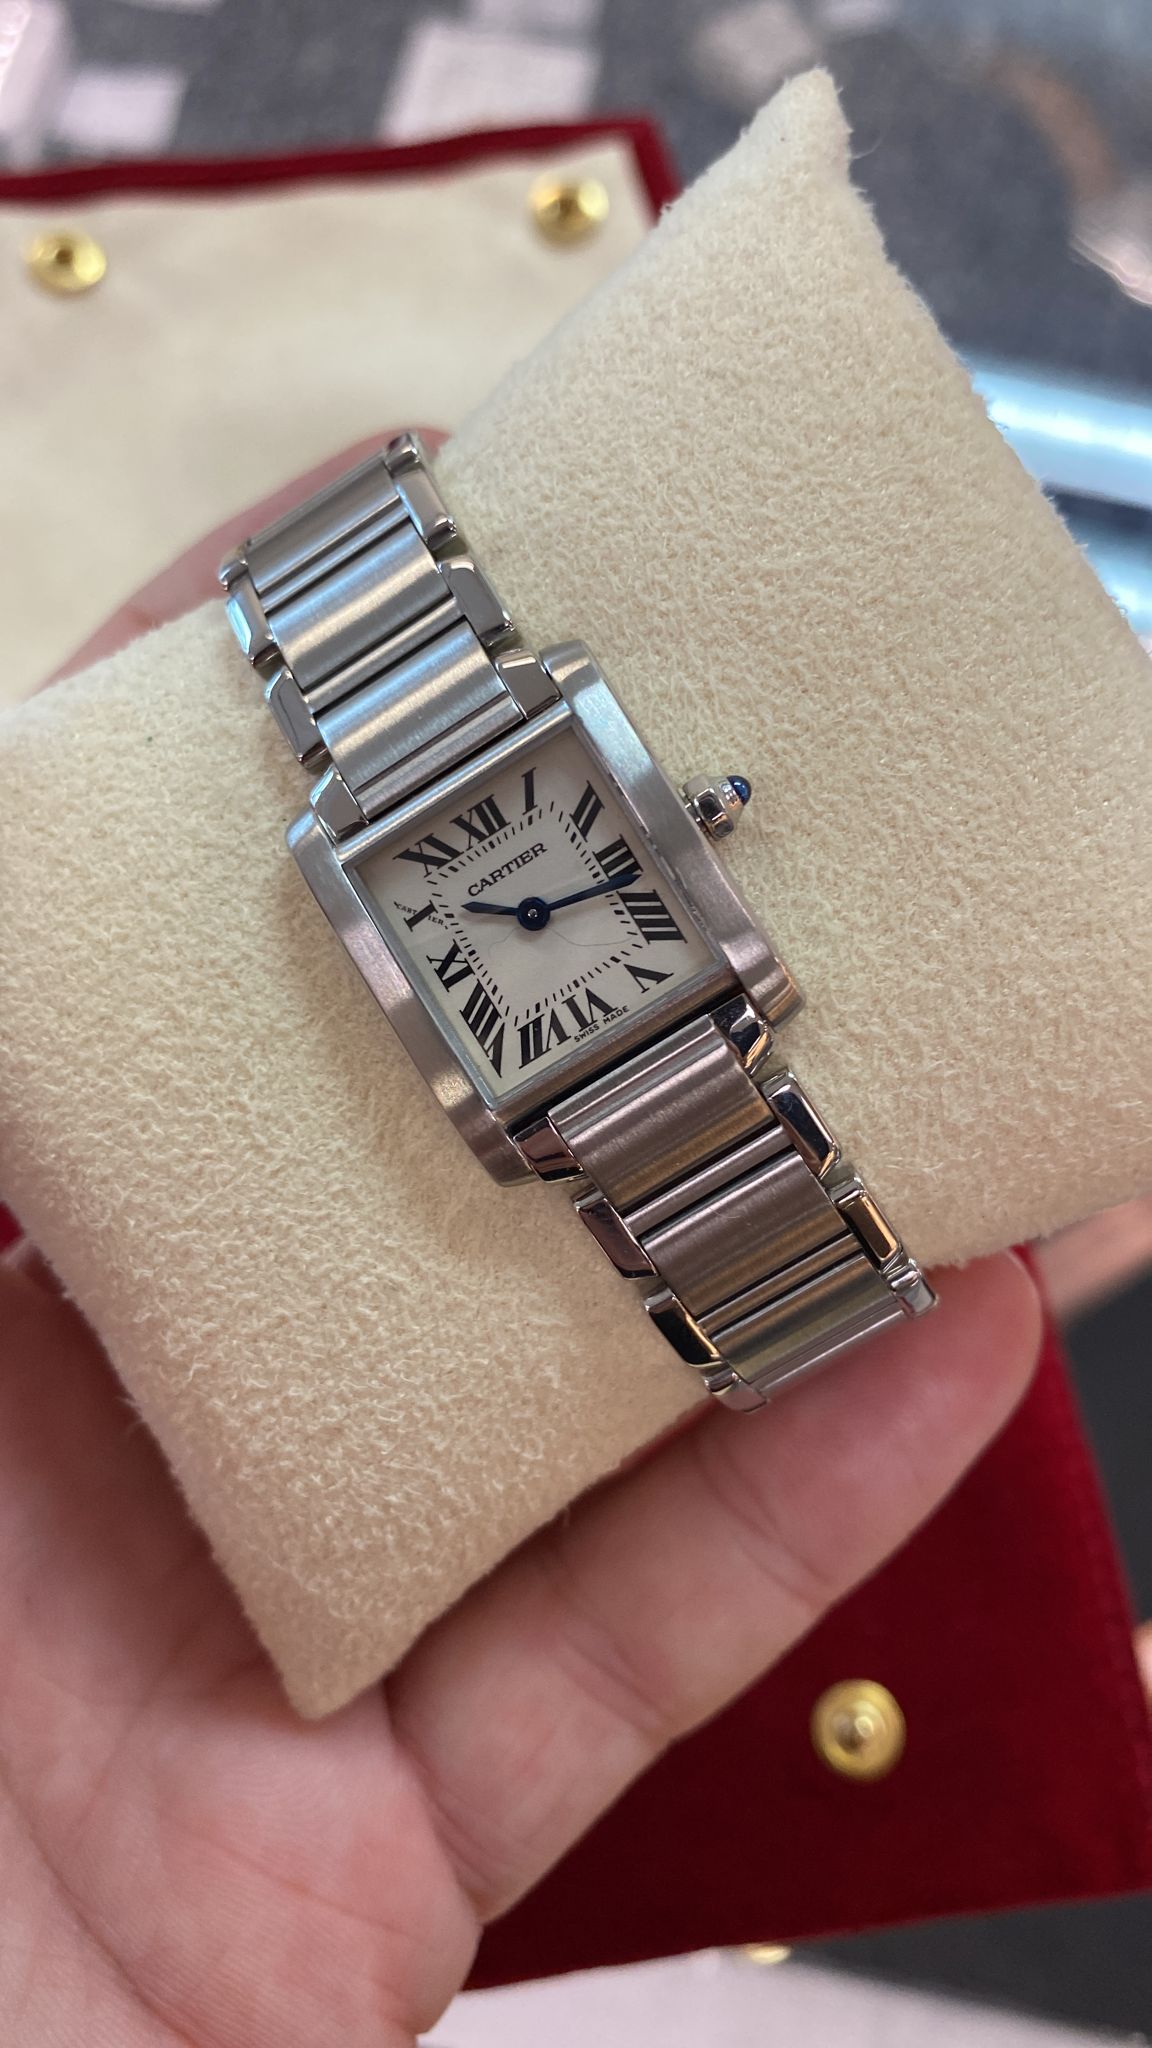 A CARTIER LADIES TANK FRANCAISE STAINLESS STEEL WATCH - Image 5 of 7